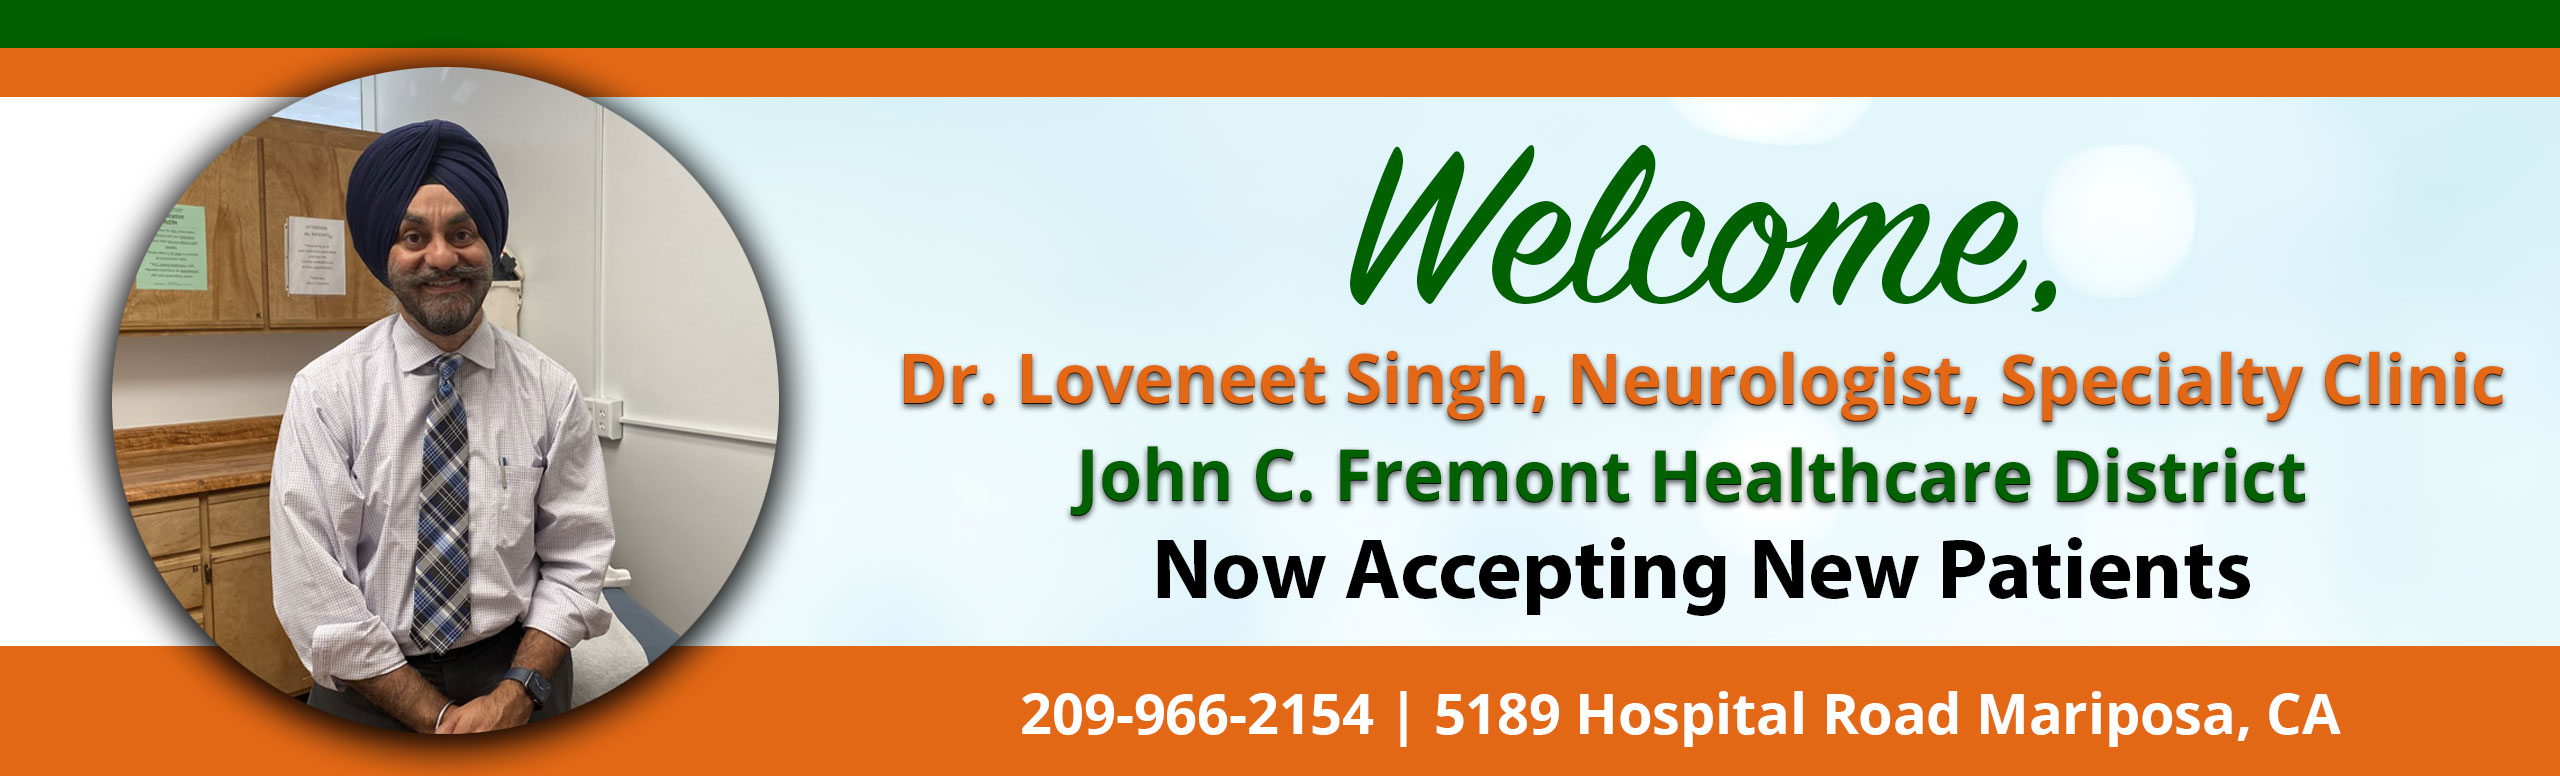 Banner picture of Dr. Loveneet Singh. Banner says:
Welcome, 
Dr. Loveneet Singh, Neurologist, Specialty Clinic
John C. Fremont Healthcare District
Now Accepting New Patients
209-966=2154

 Neurologist
Specialty Clinic
John C. Fremont Healthcare District
Now Accepting New Patients

209-966-2154
5189 Hospital Road Mariposa, CA